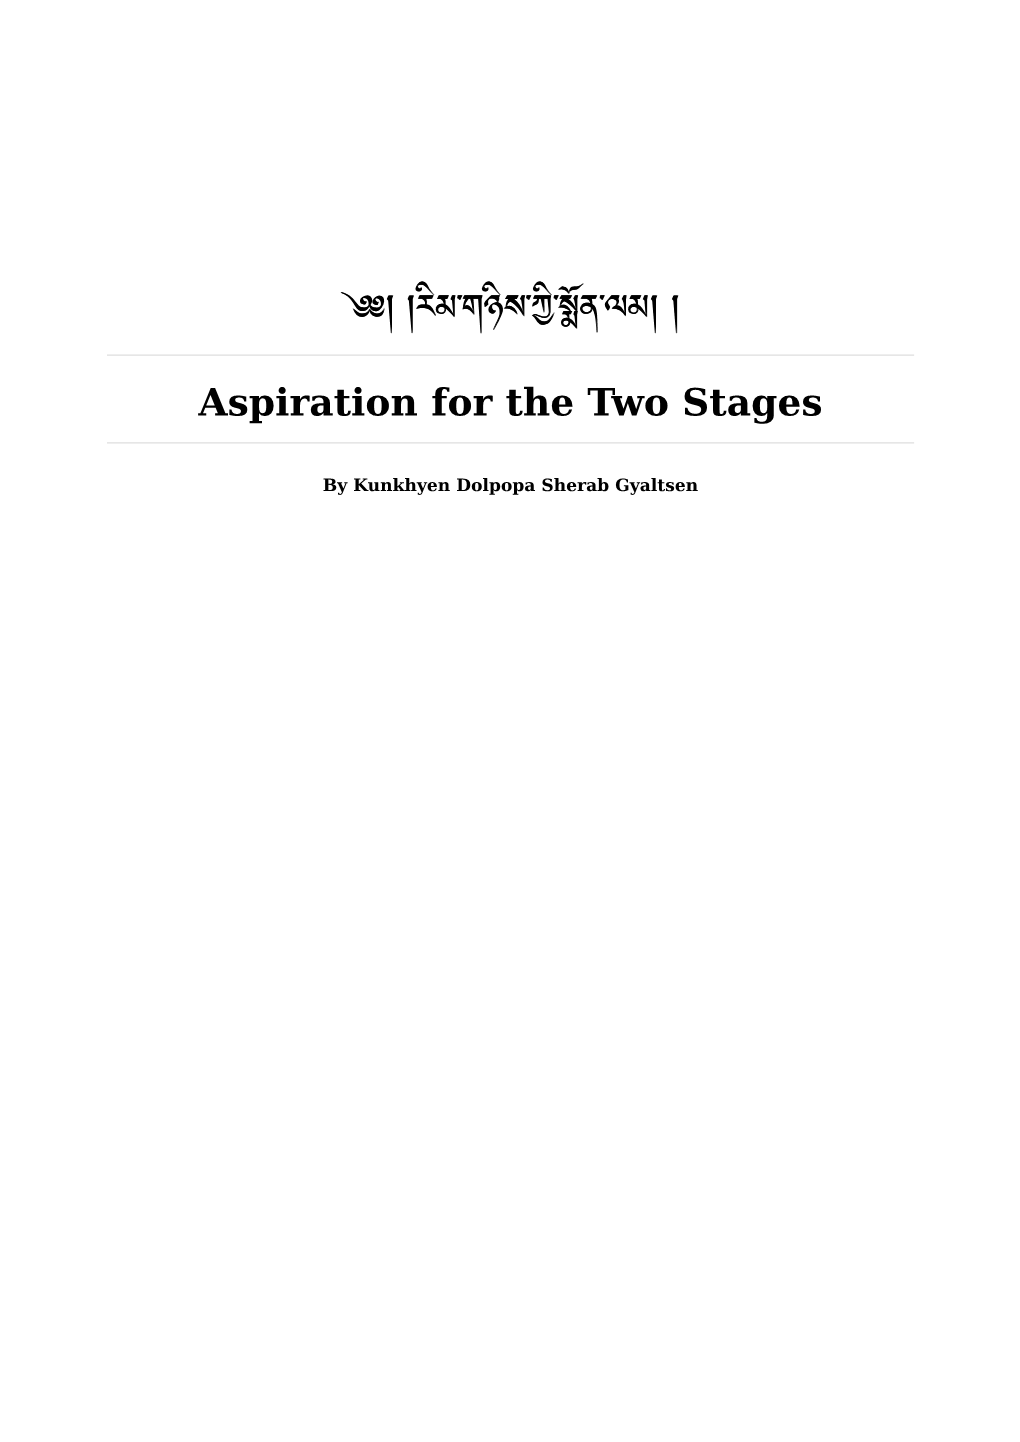 Aspiration for the Two Stages